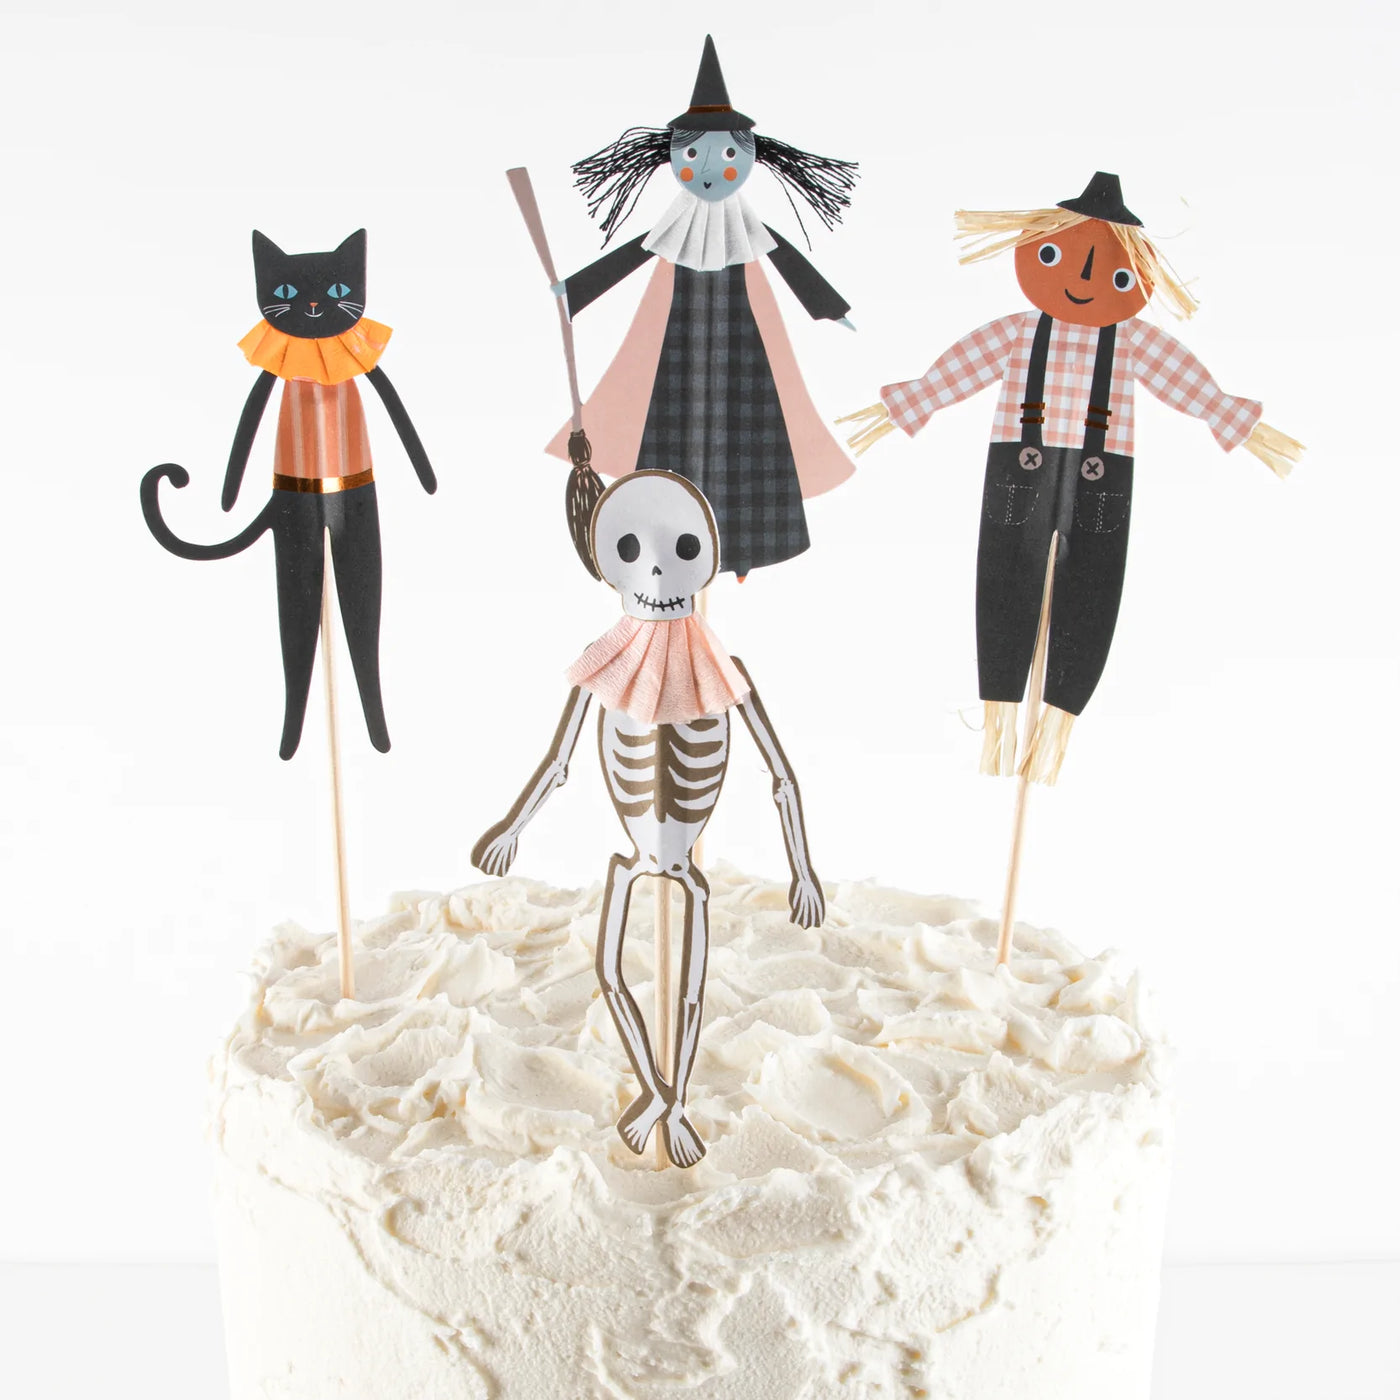 Pumpkin Patch Cake Toppers